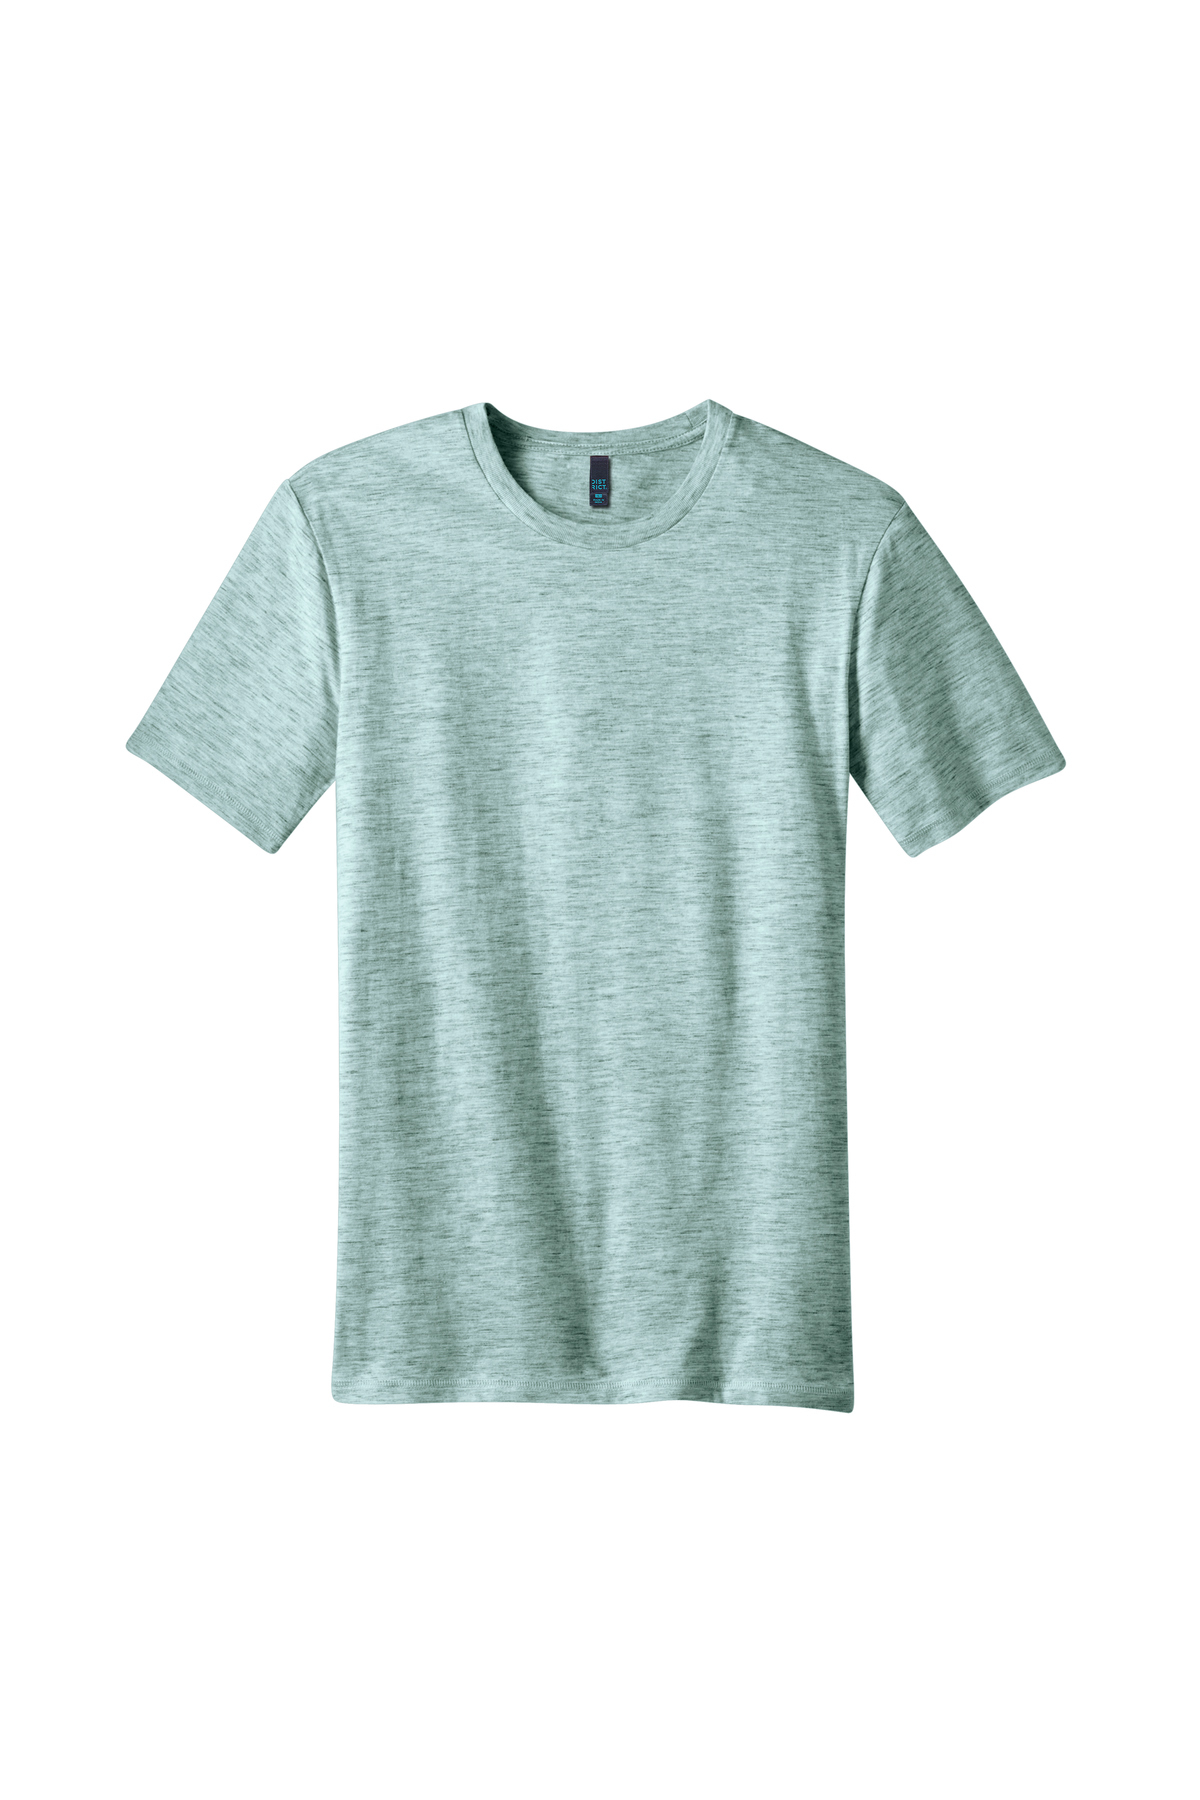 District - Young Mens Extreme Heather Crew Tee | Product | SanMar